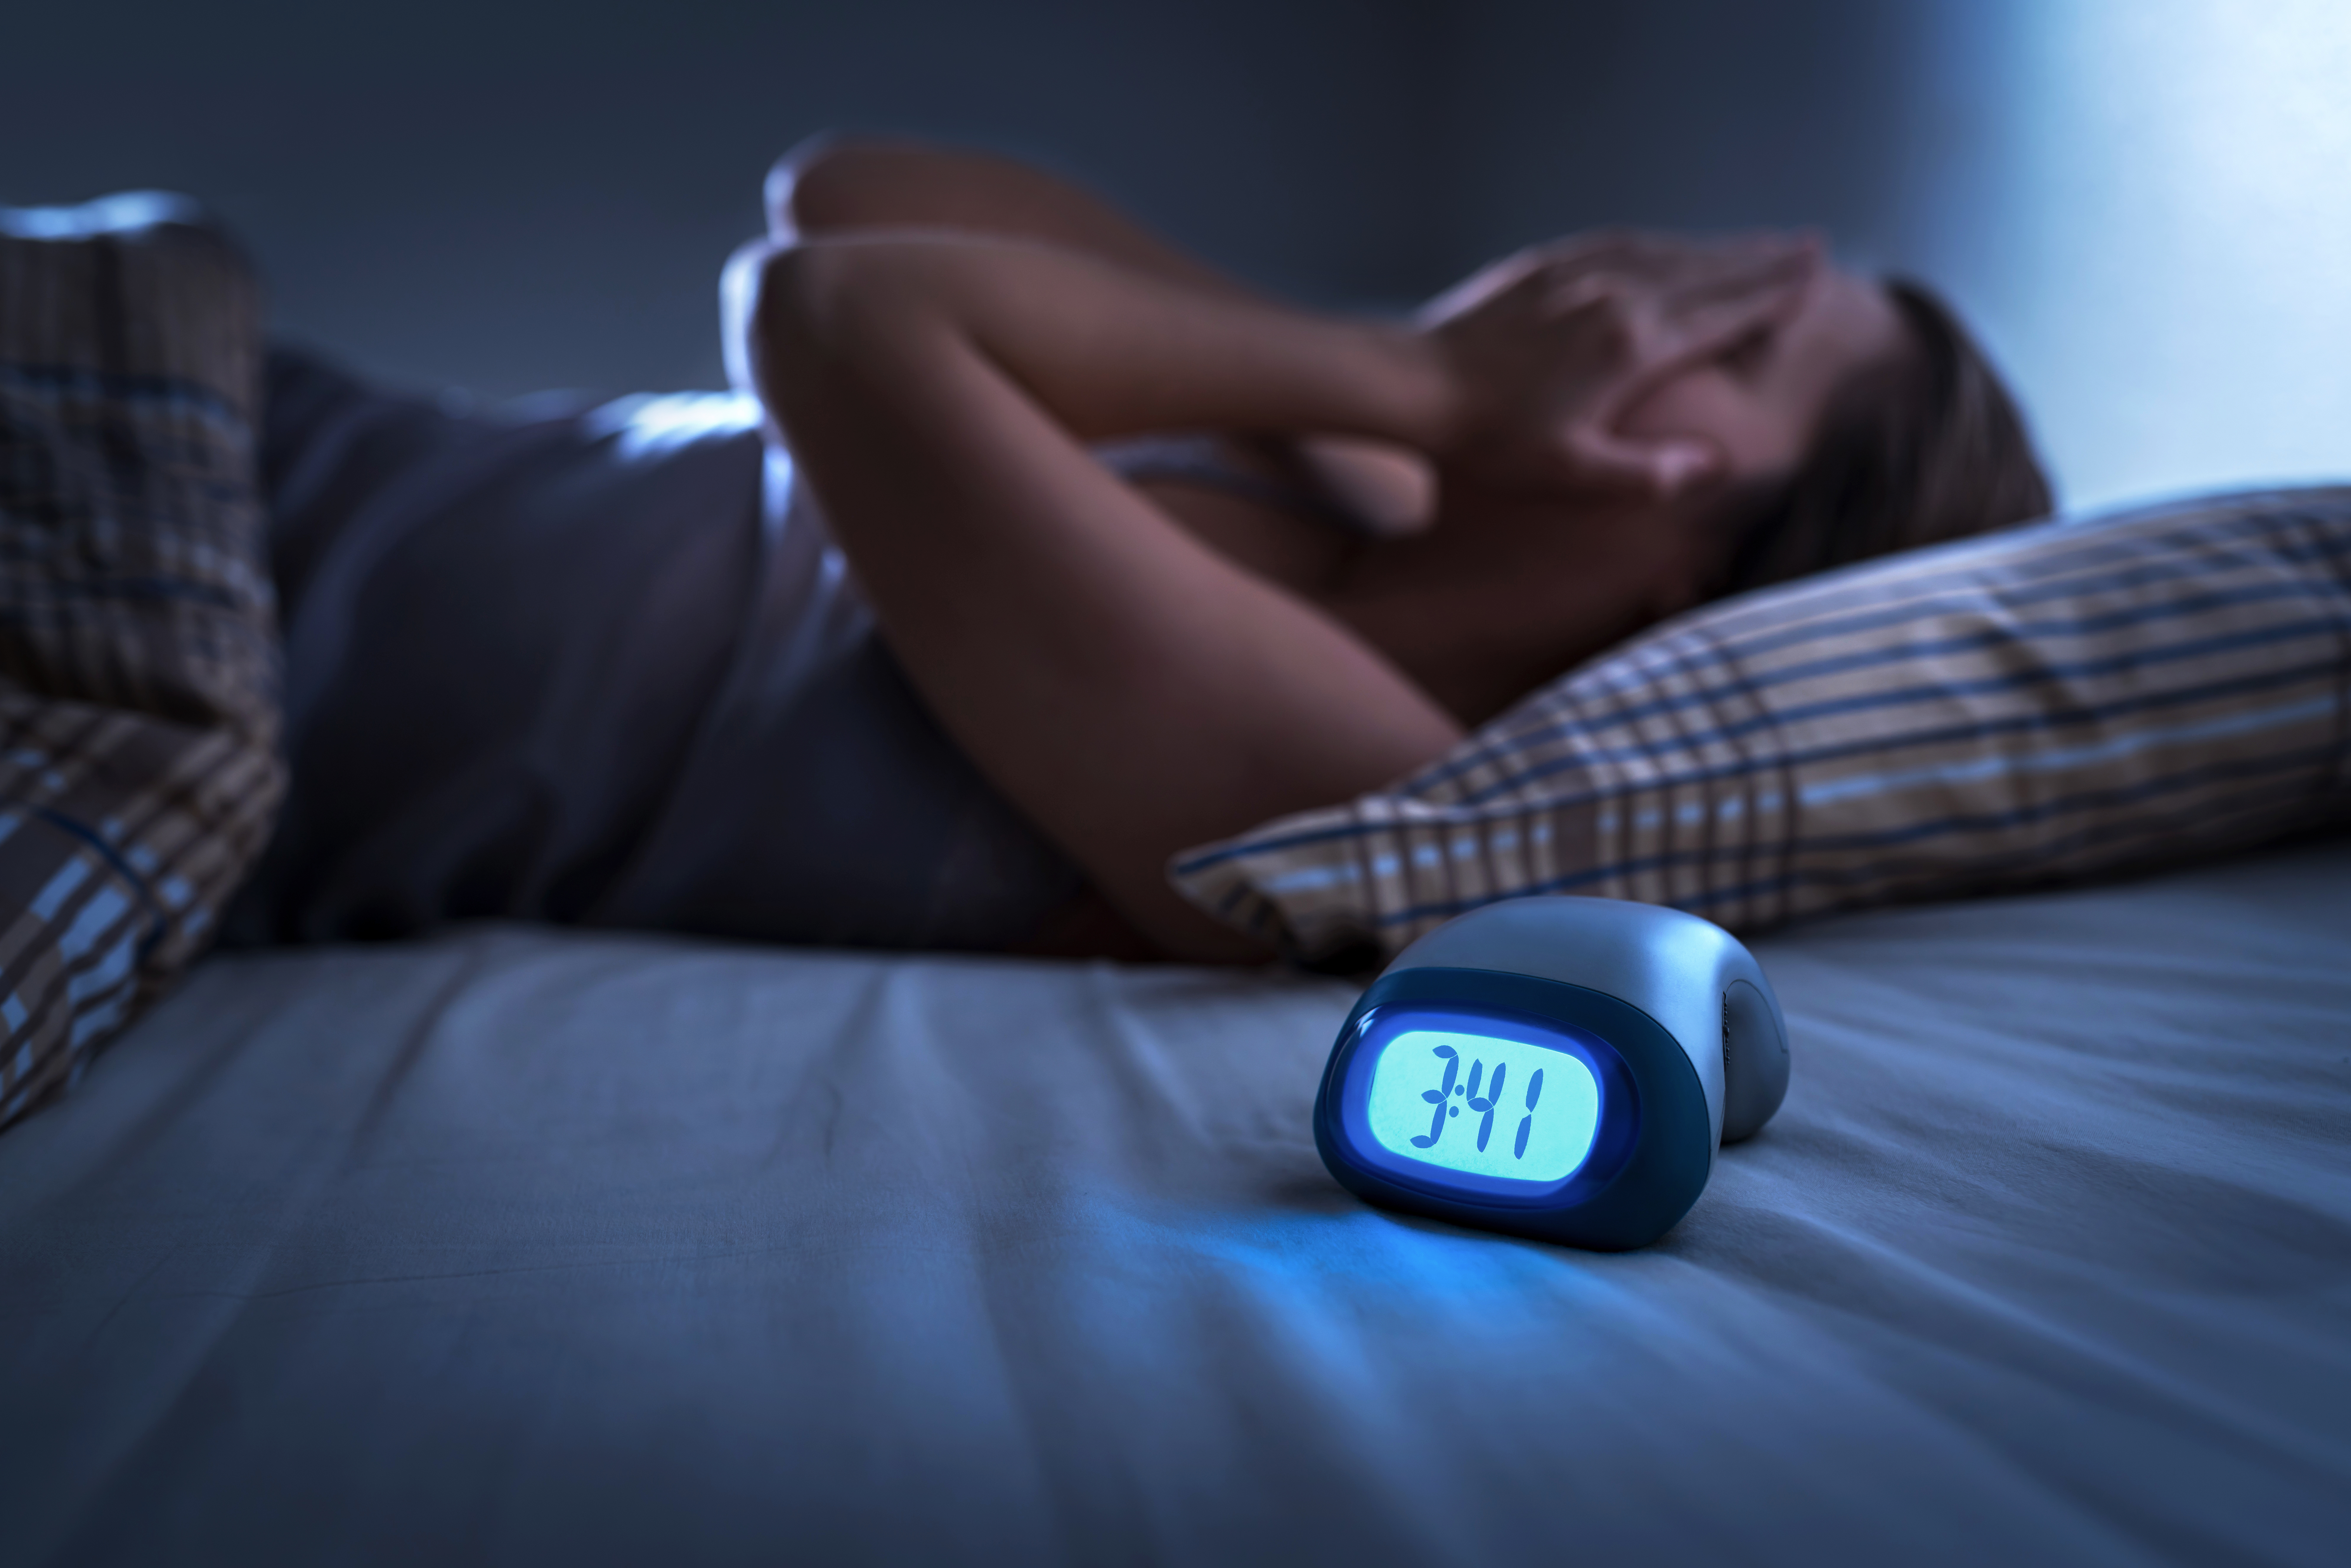 woman having trouble sleeping with a clock that says 3:41am